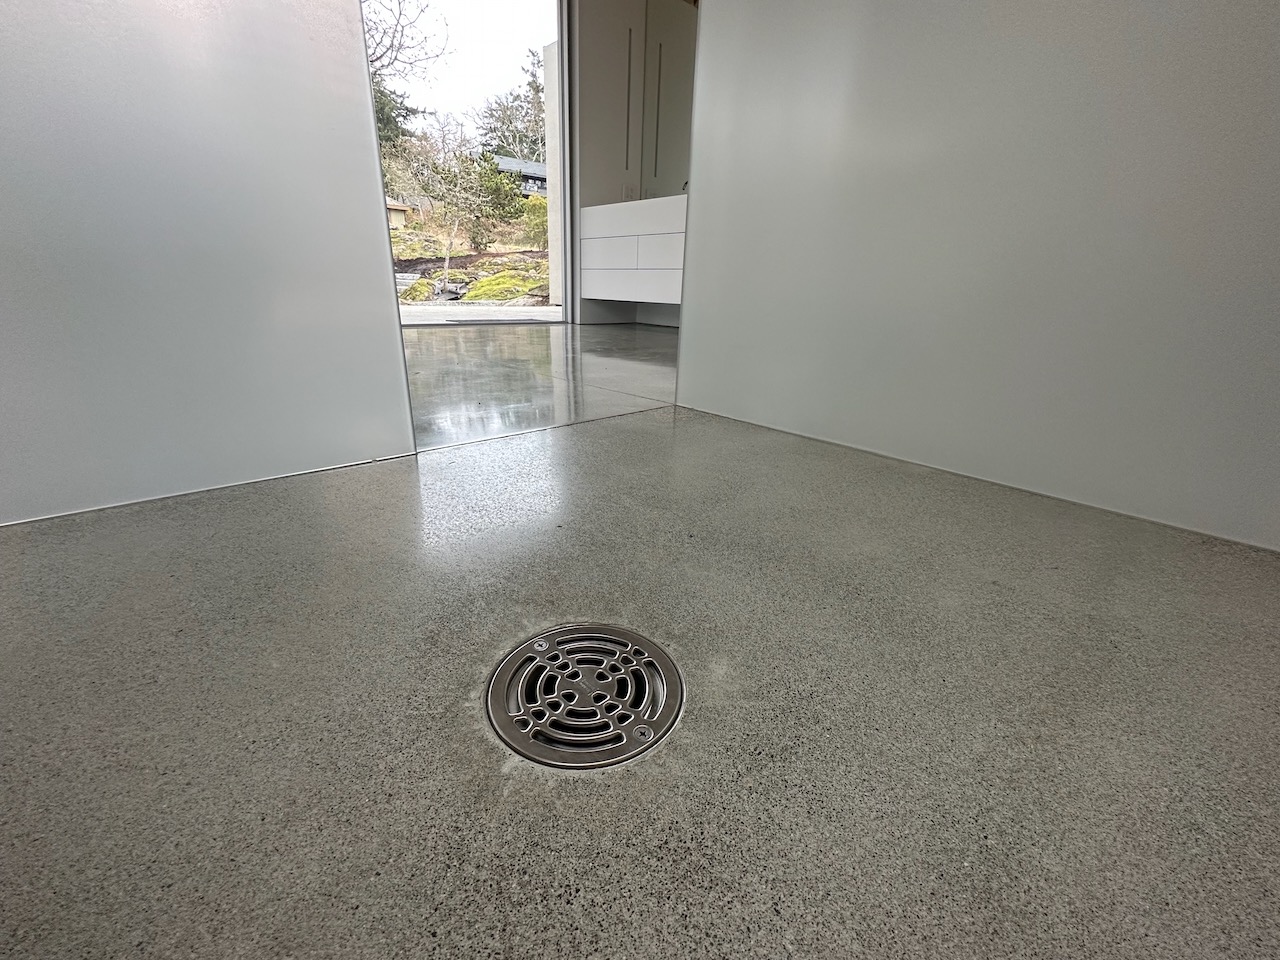 curb less polished concrete shower with drain. the floor is heated.